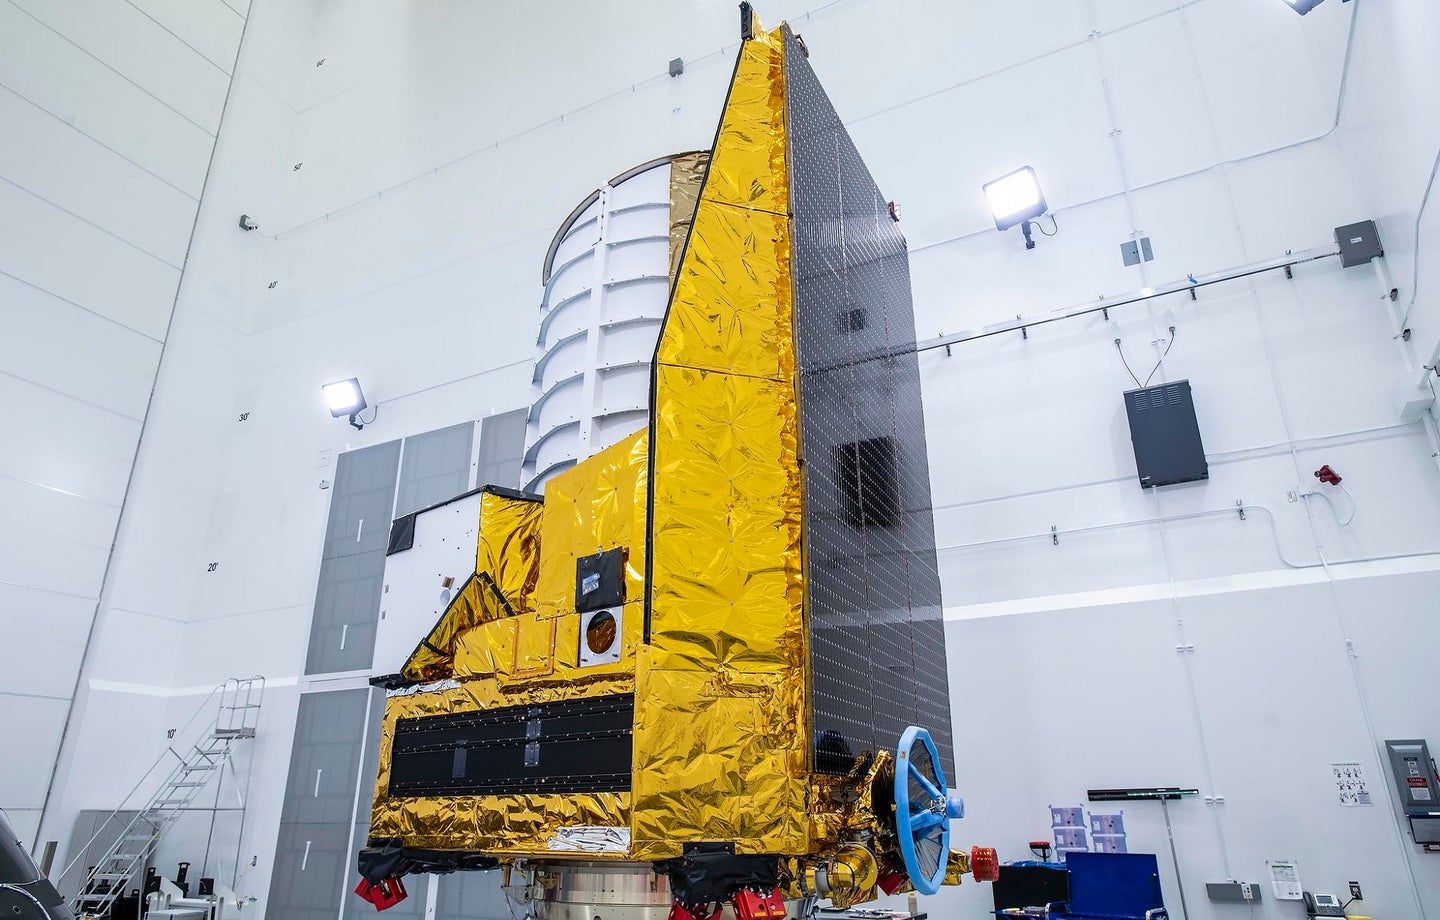 Euclid Space Telescope mounted on SpaceX Falcon 9 rocket in a holding facility before dark energy and dark matter mission launch